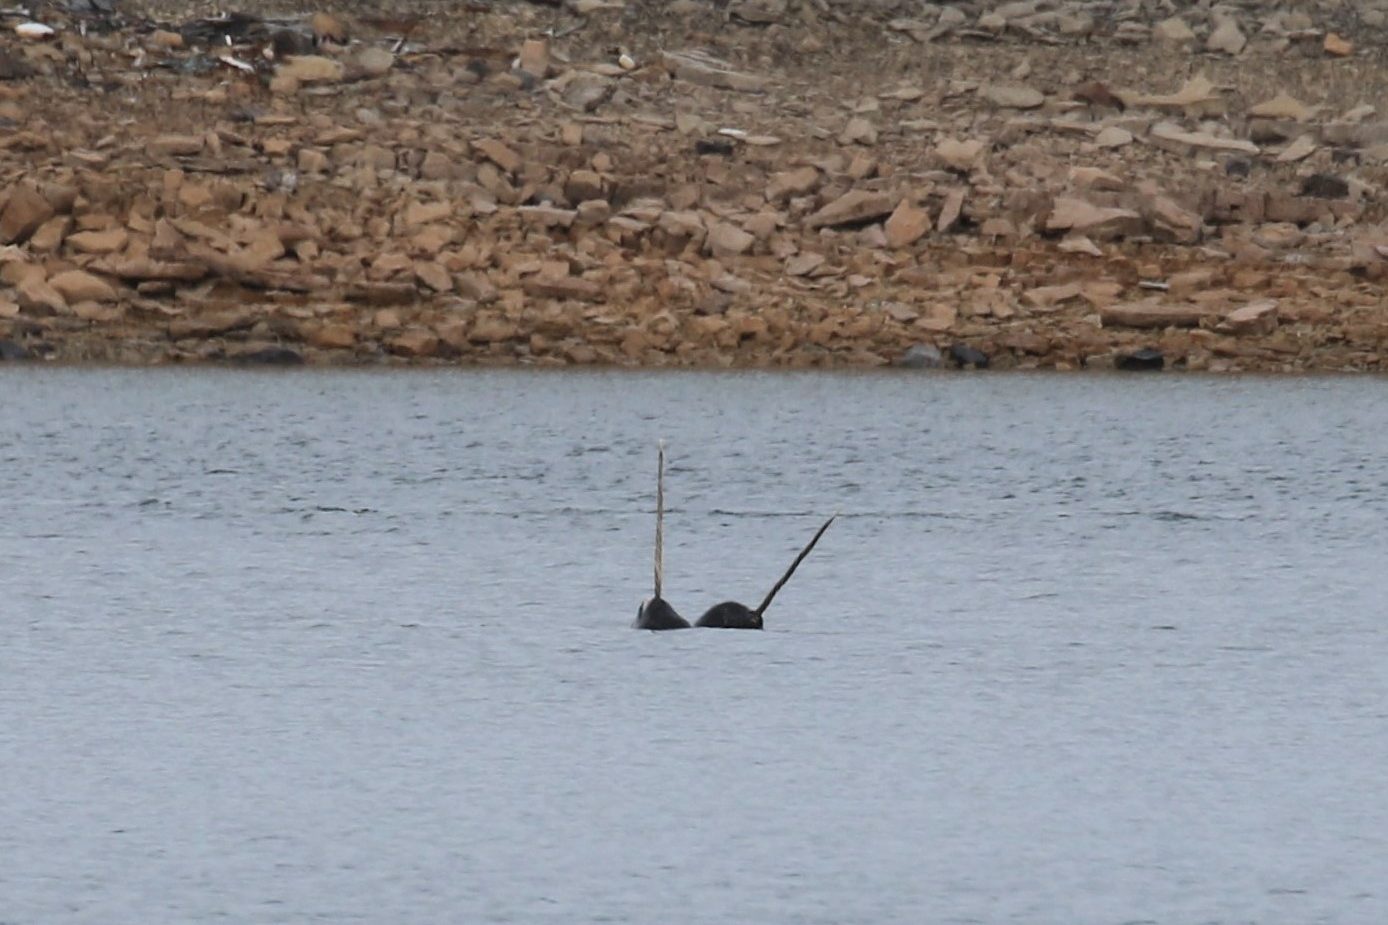 Narwhals surfacing near shore with "tusks" out of the water